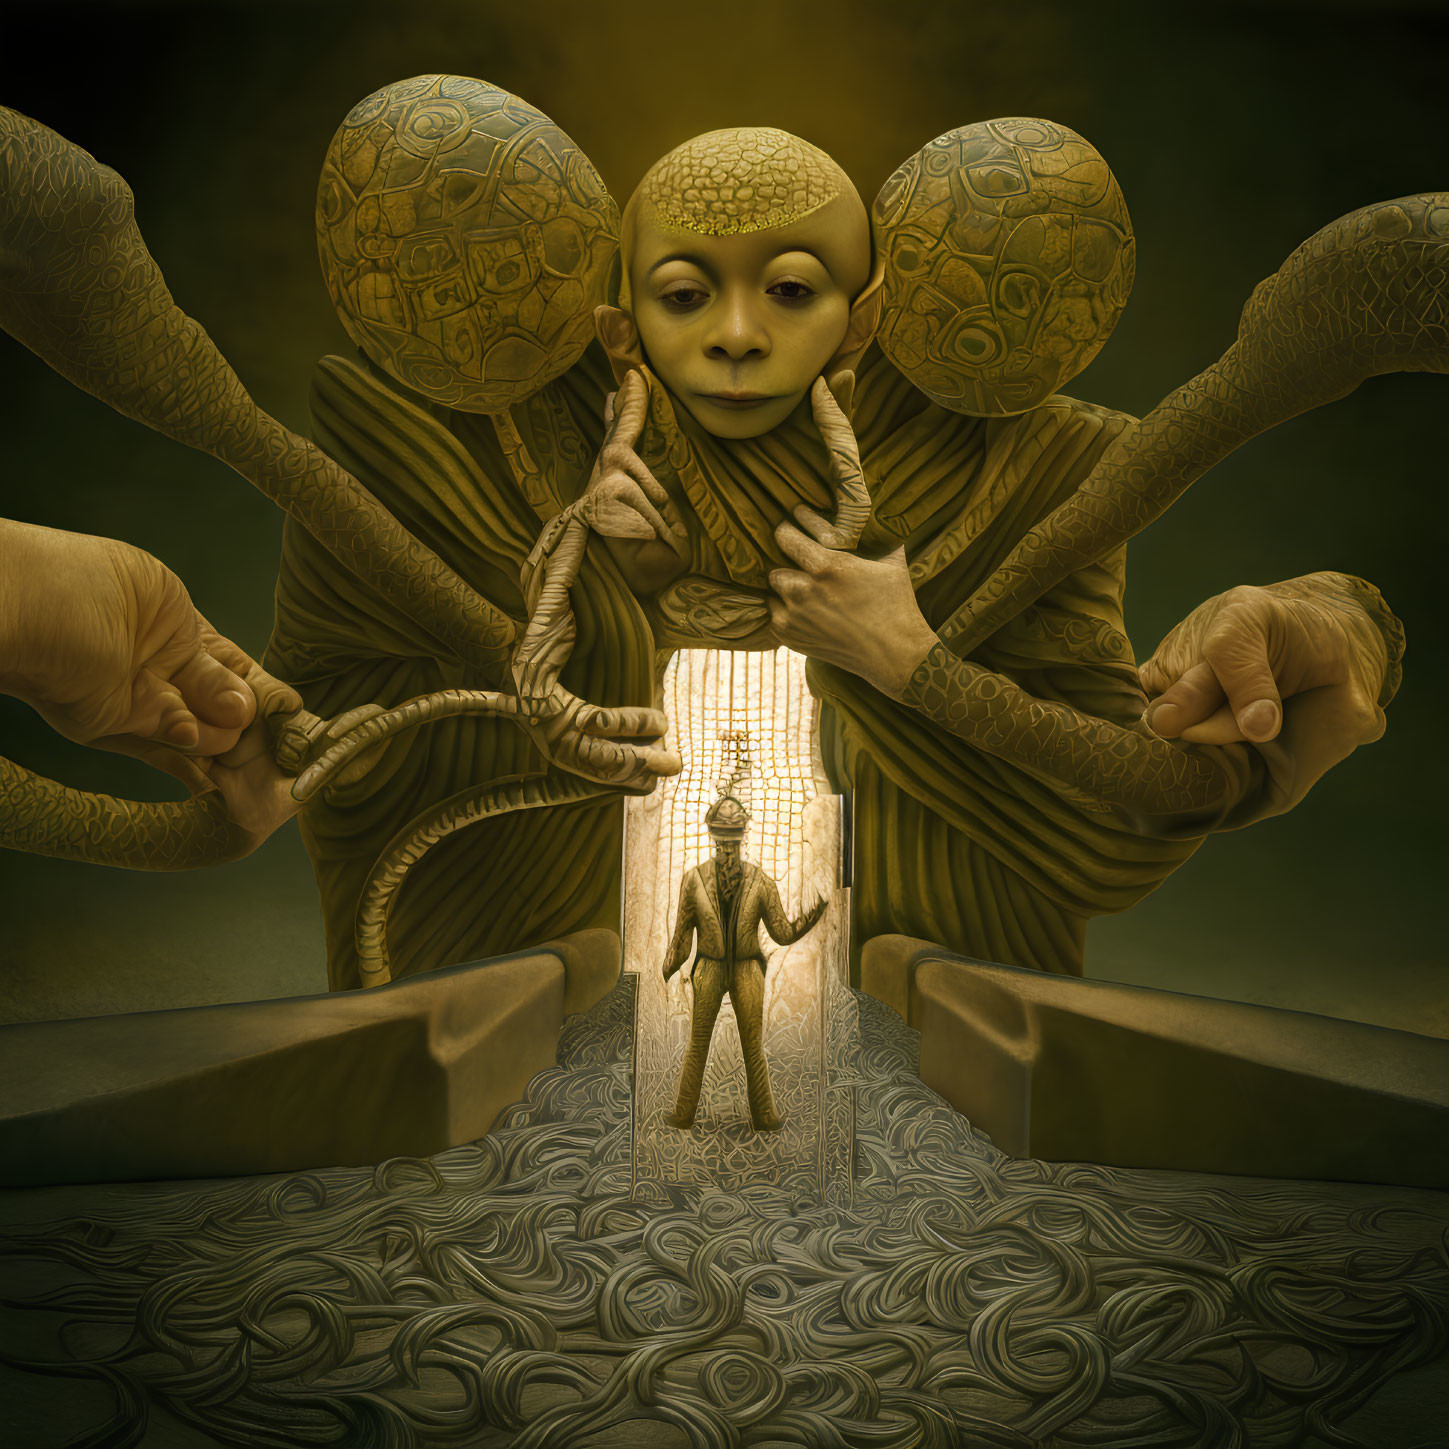 Surreal artwork featuring humanoid figure with multiple arms holding brains and hands pulling ropes.